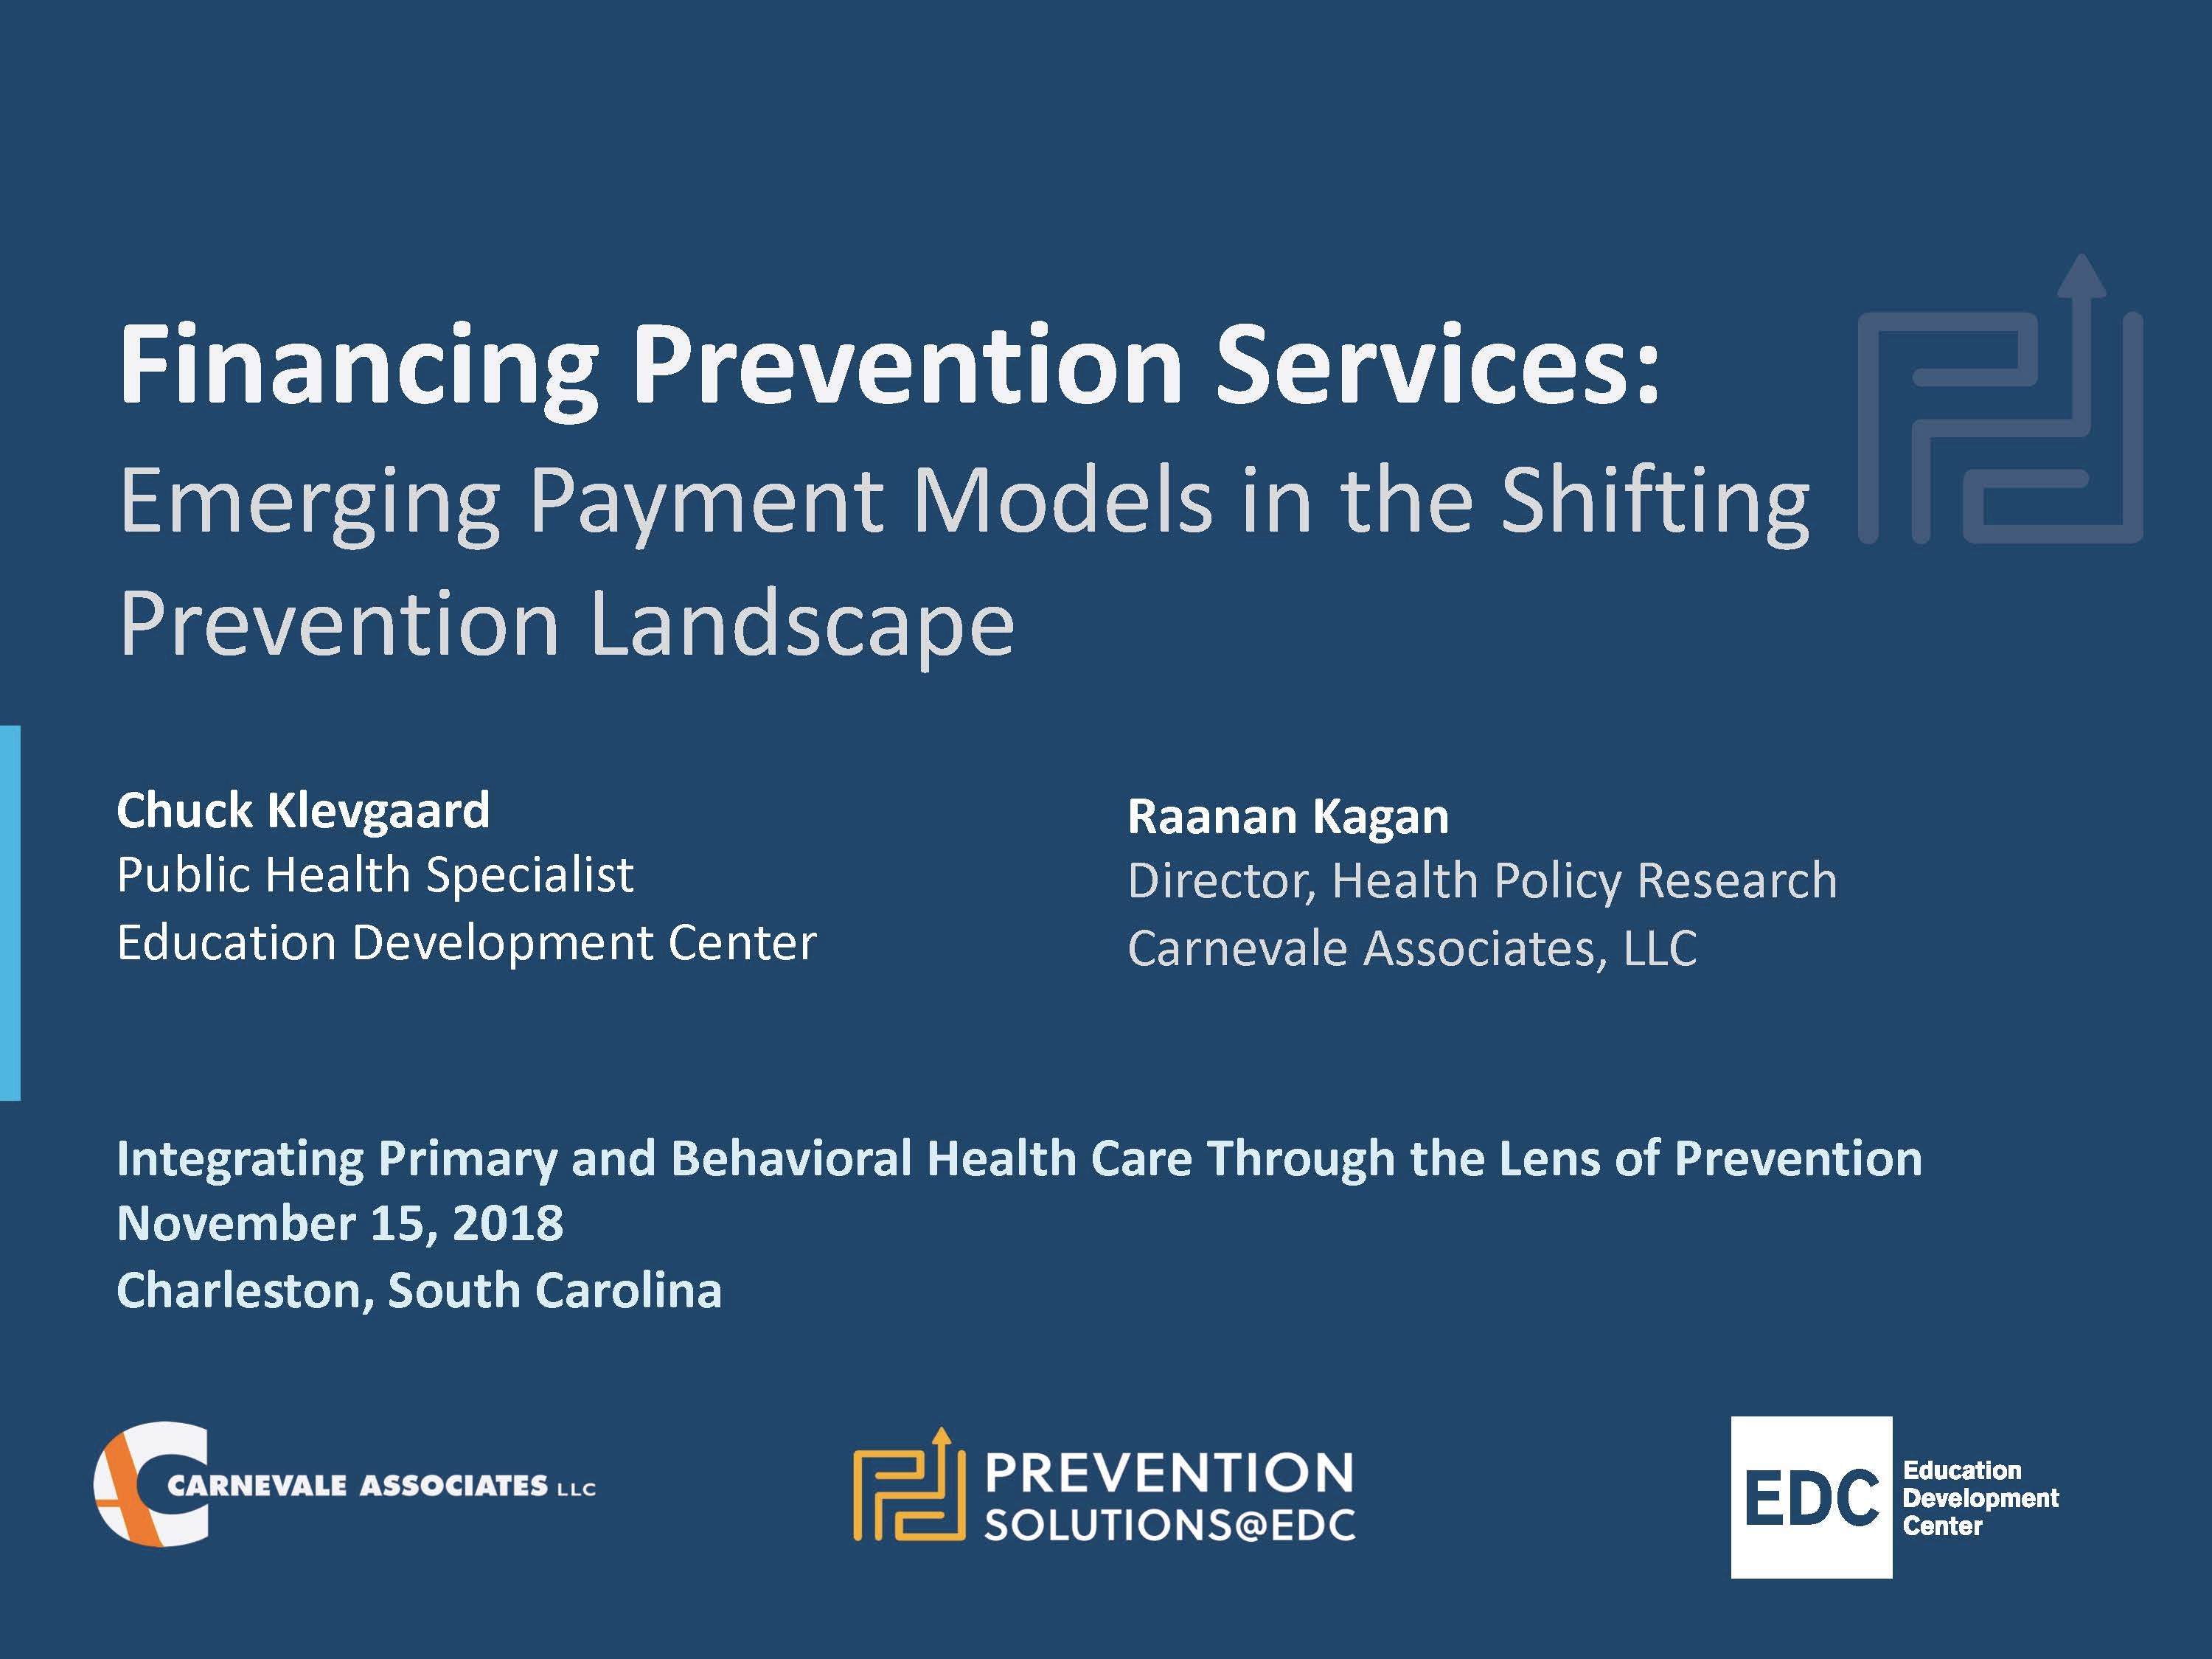 Emerging Payment Models in the Shifting Prevention Landscape